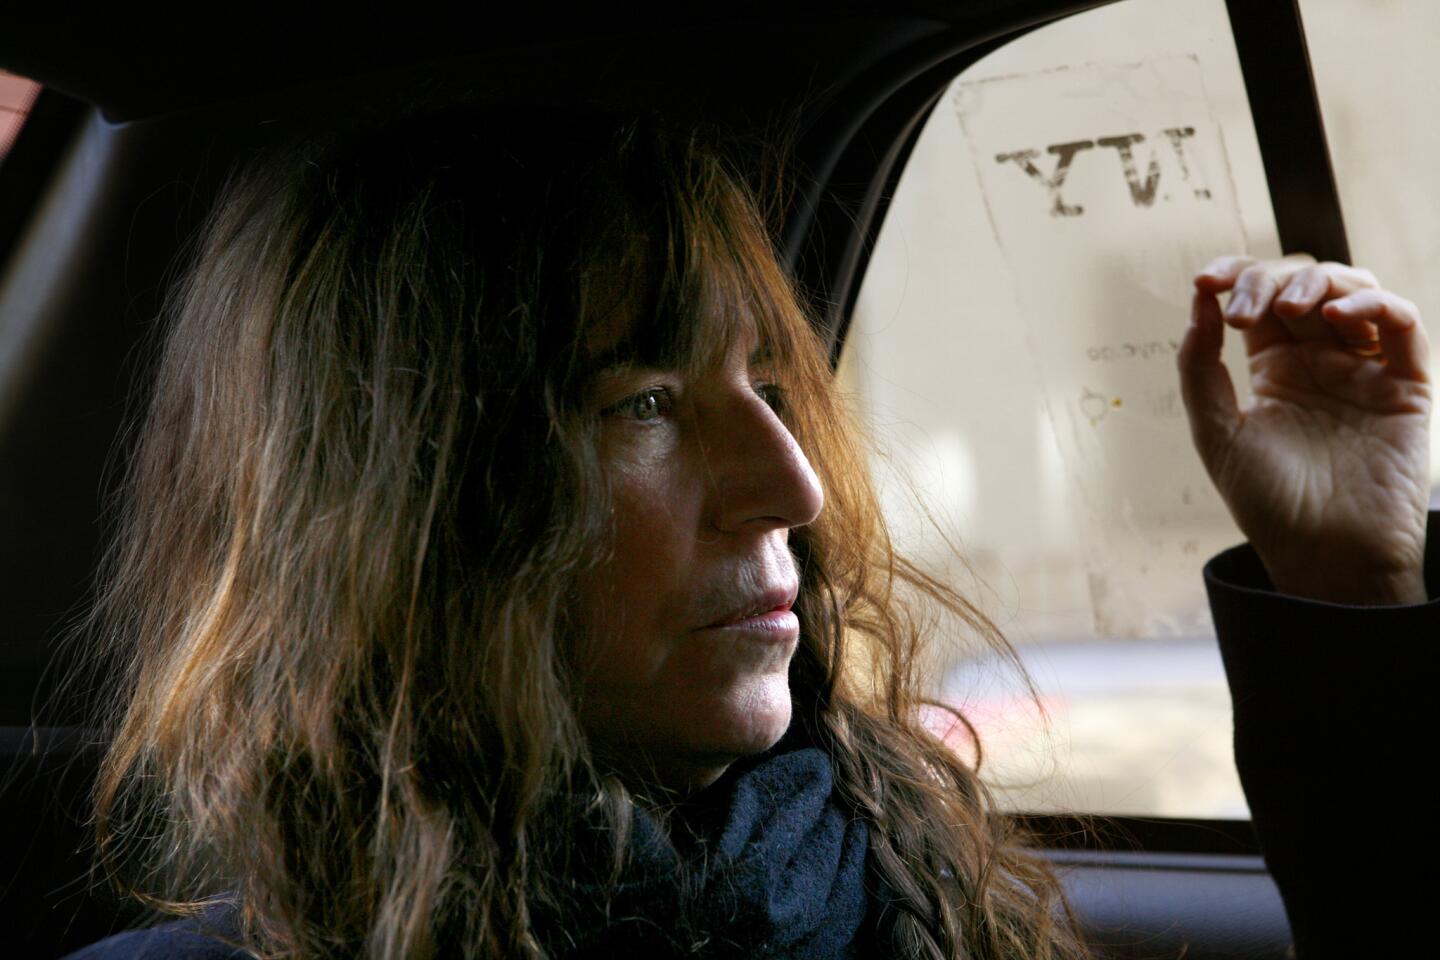 Writer and musician Patti Smith has annotated a copy of her memoir "Just Kids" to benefit PEN.